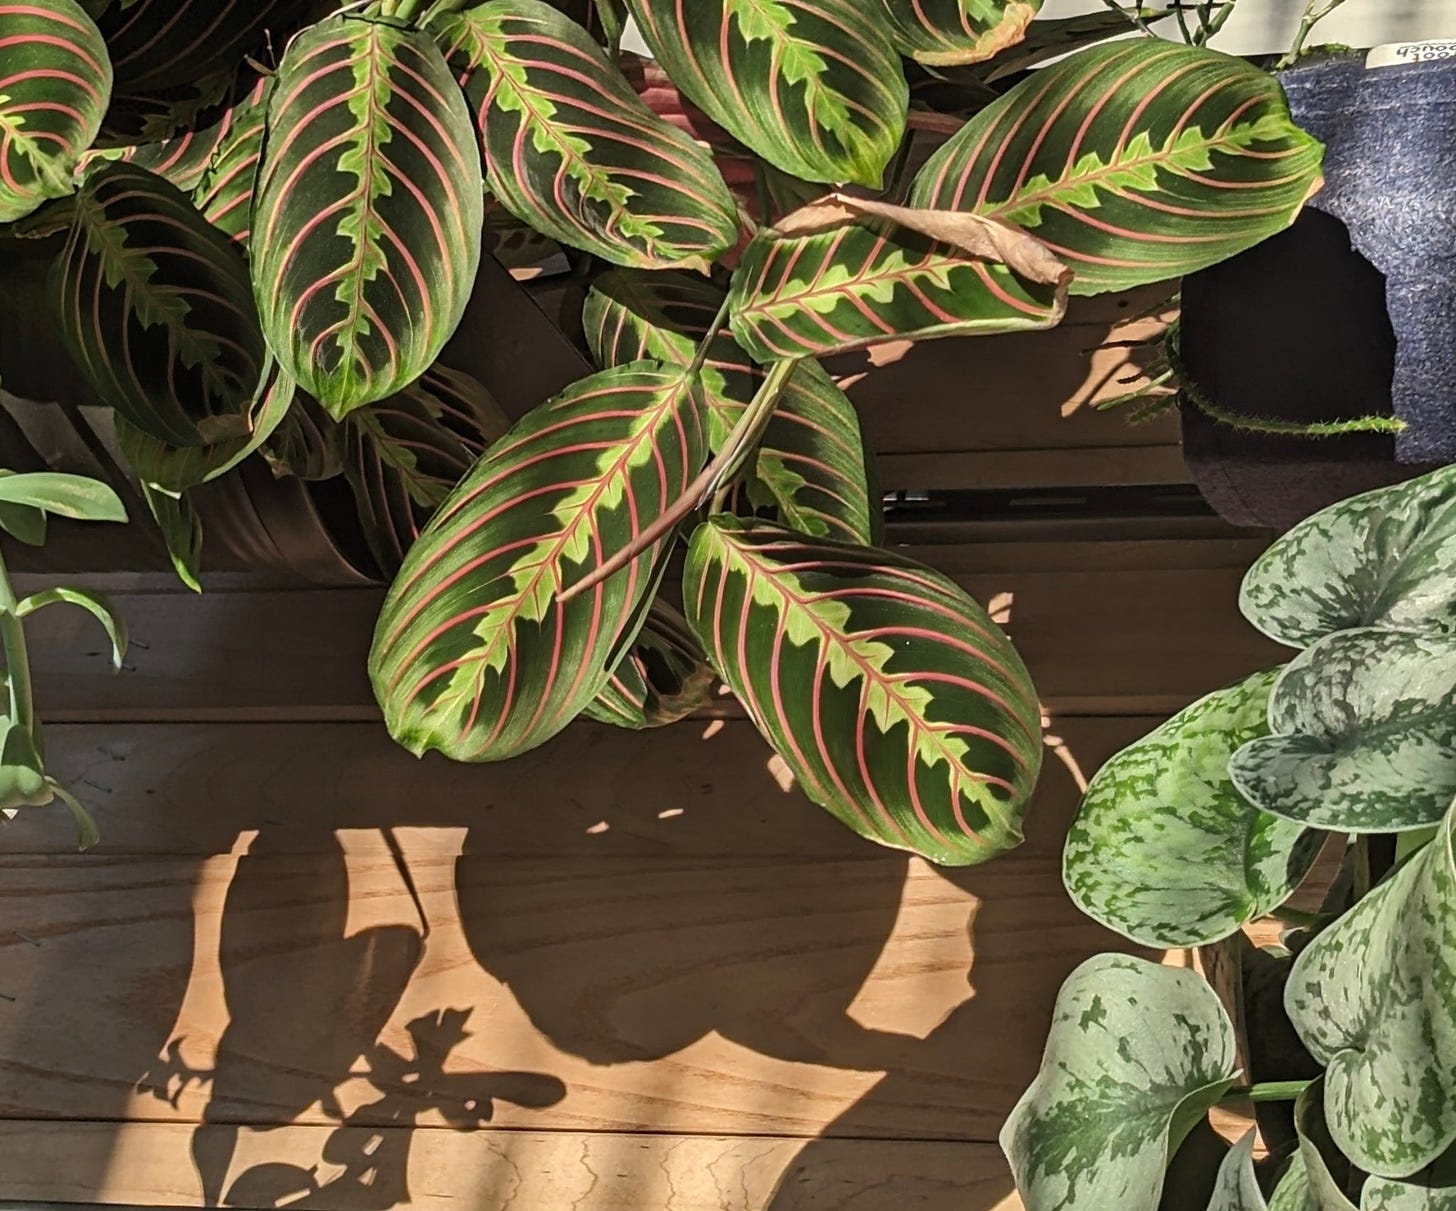 a collection of green-and-red striped and green mottled leaves and their shadows on a wood plank floor